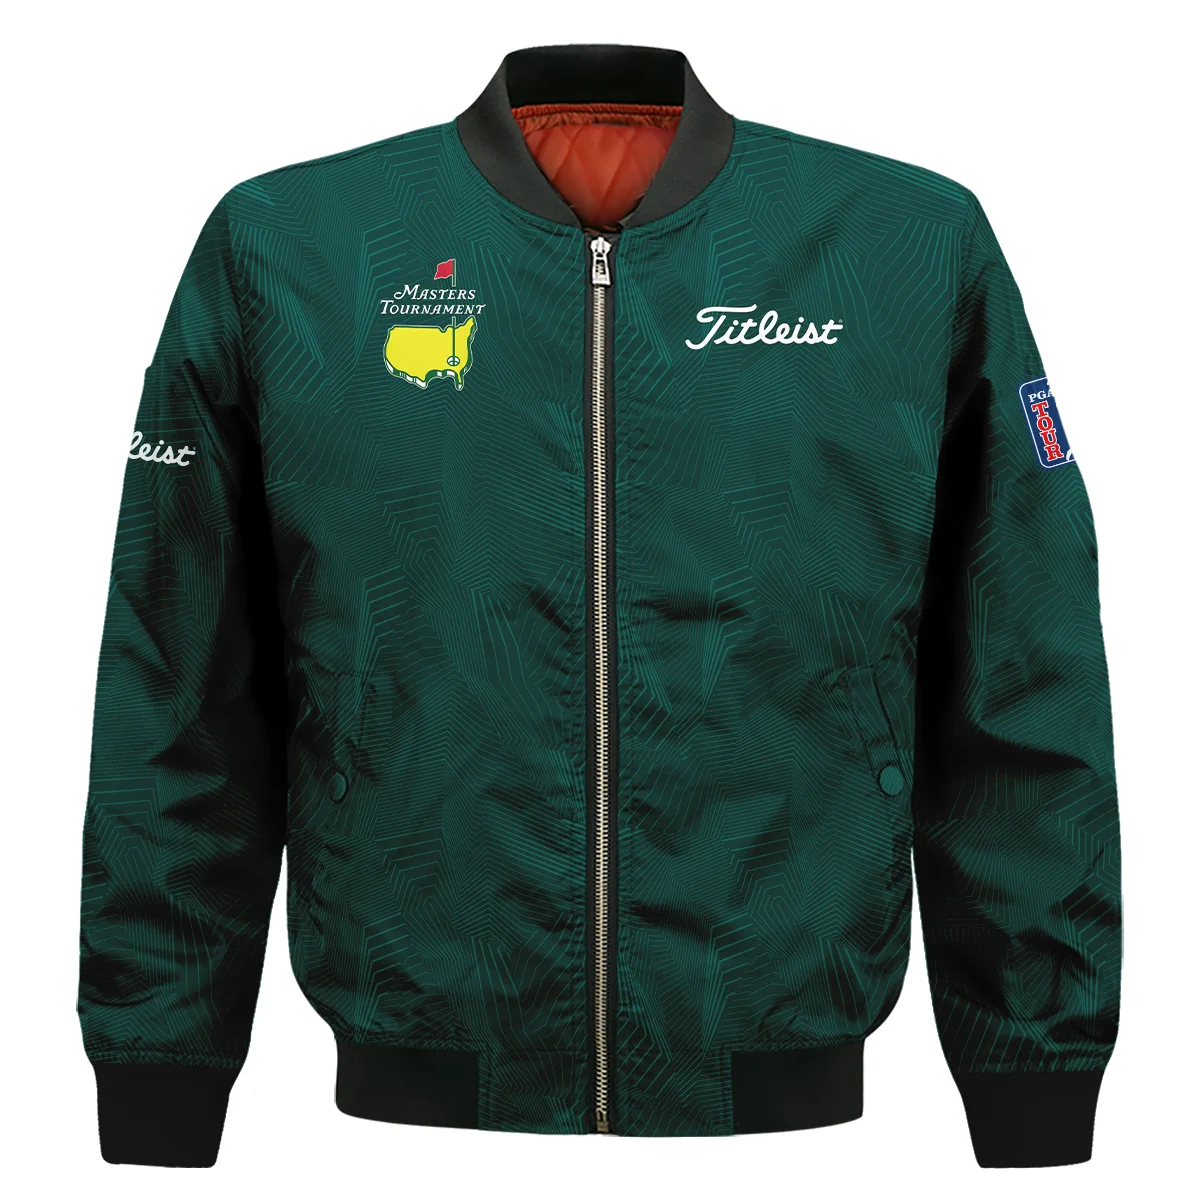 Abstract Pattern Lines Forest Green Masters Tournament Titleist Quarter-Zip Jacket Style Classic Quarter-Zip Jacket